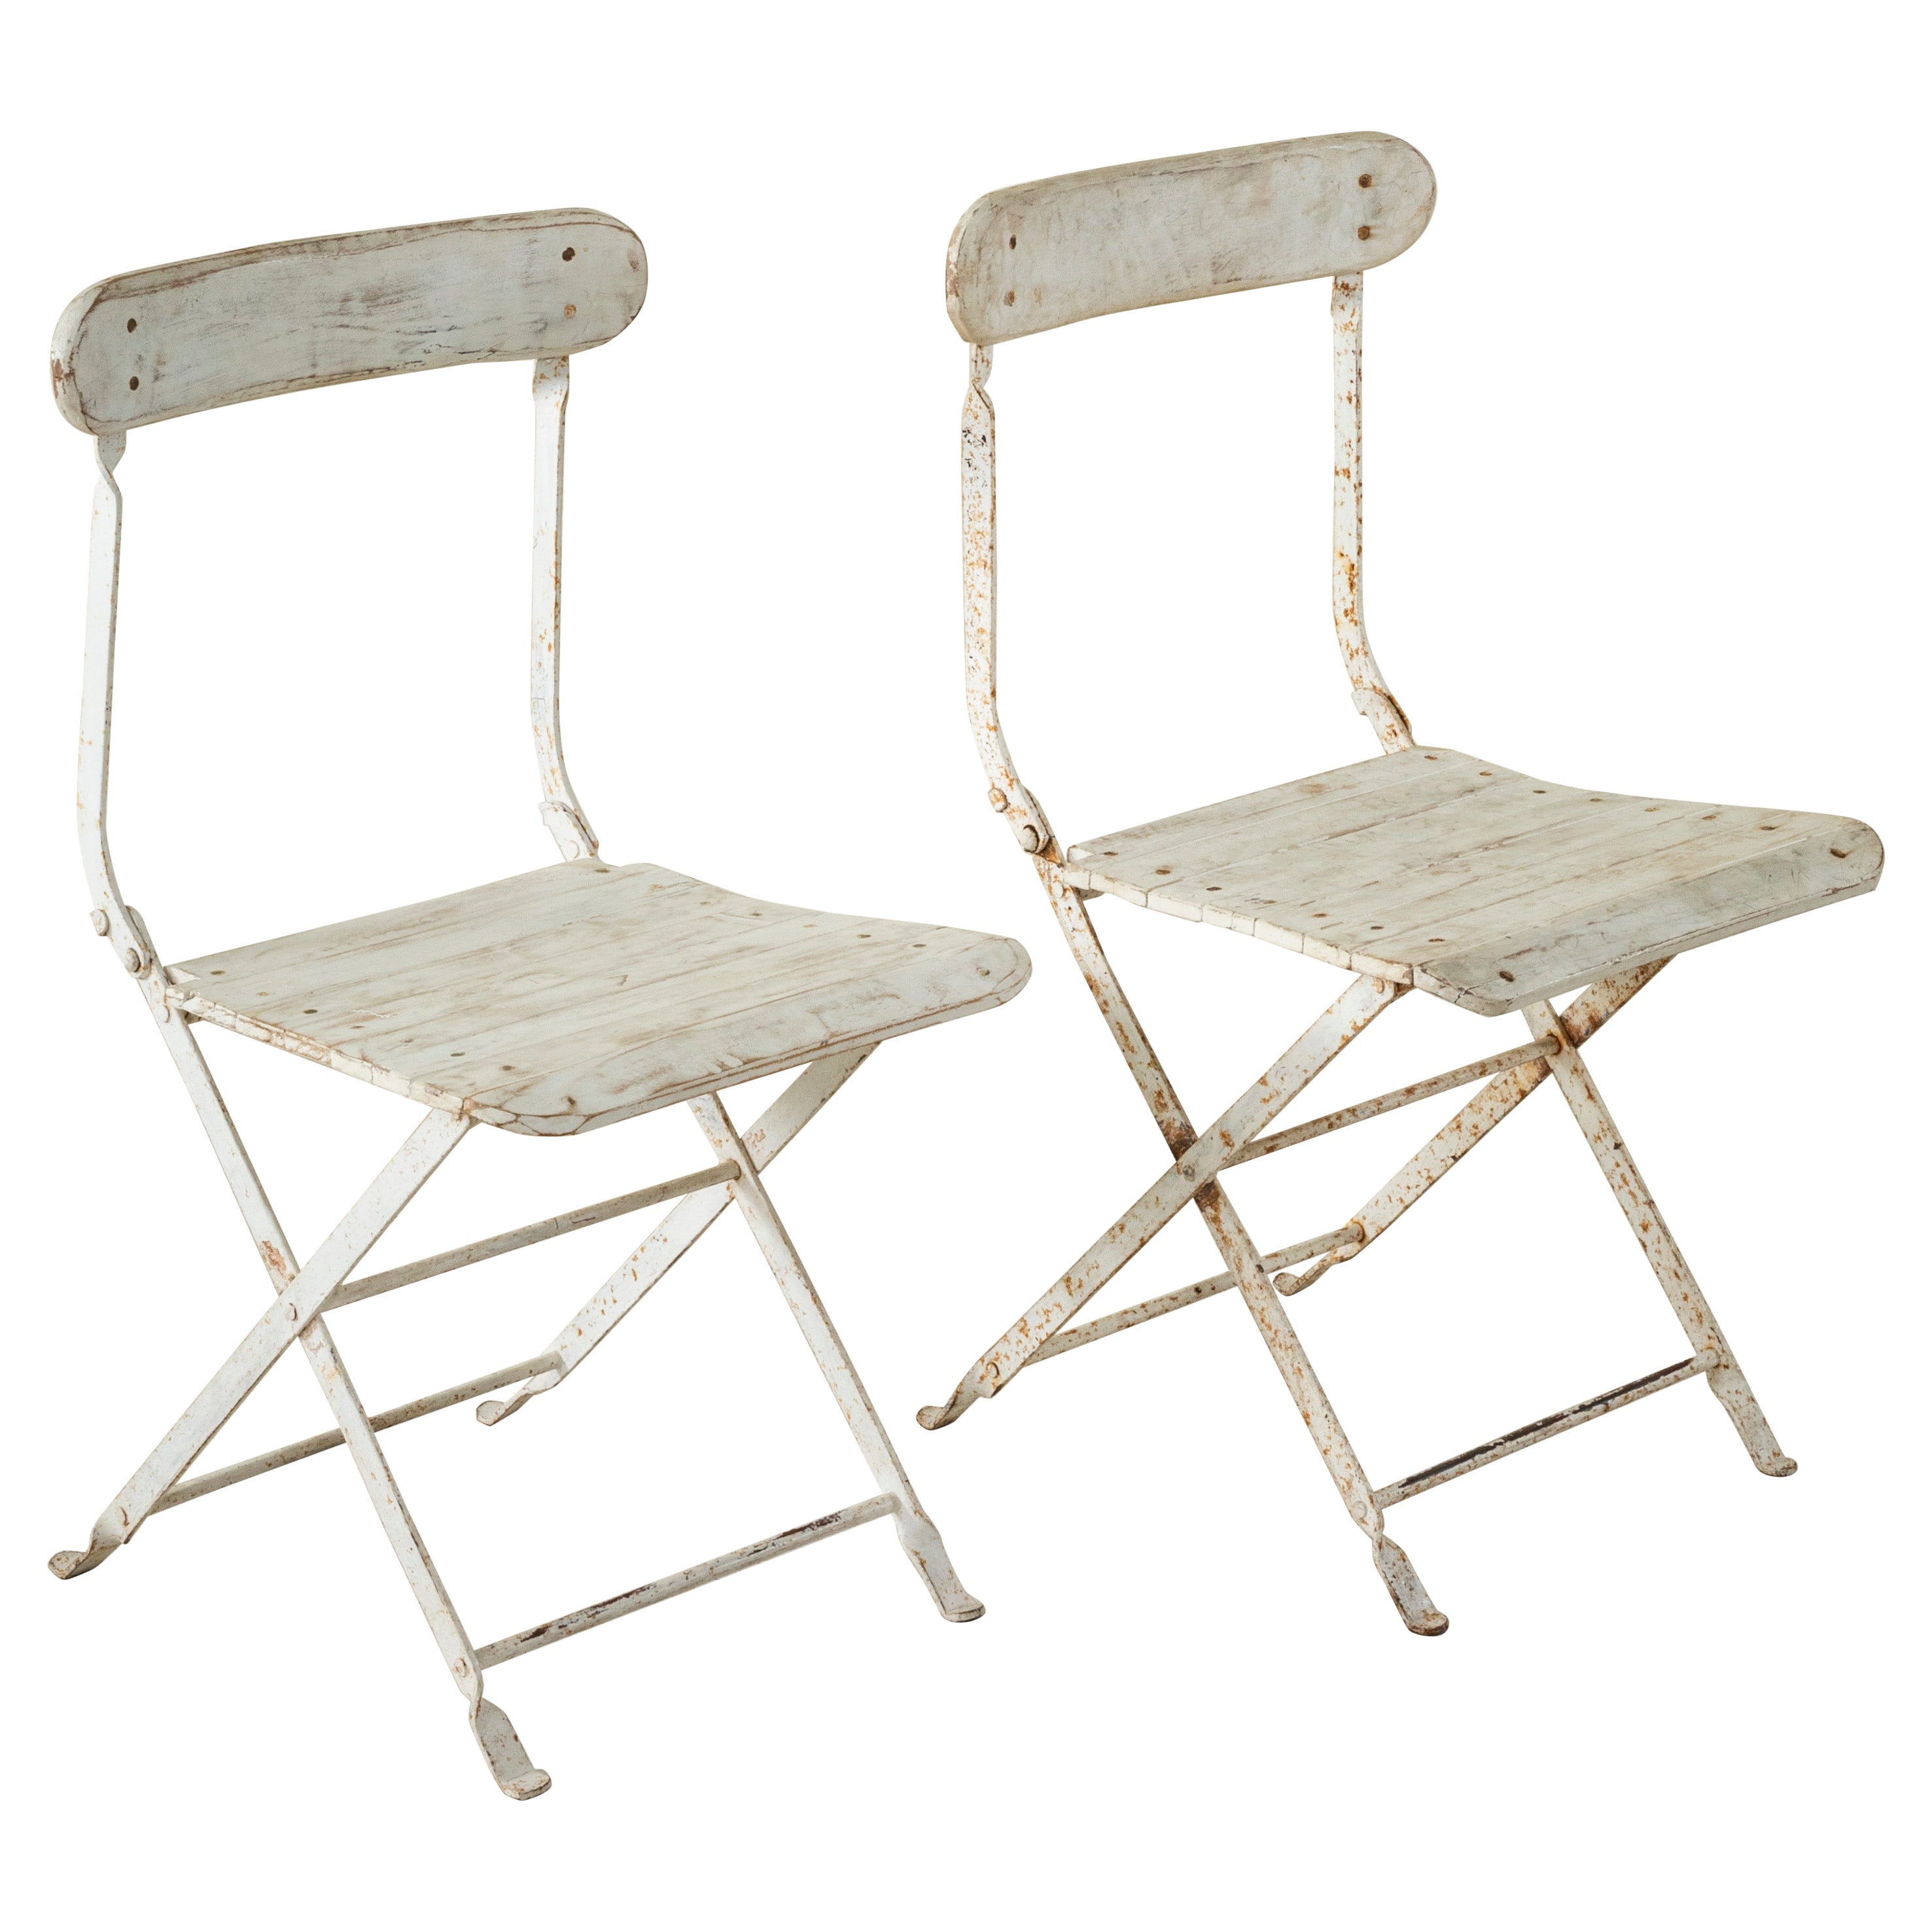 Midcentury French White Painted Iron and Ash Folding Garden Chairs, in Pairs For Sale